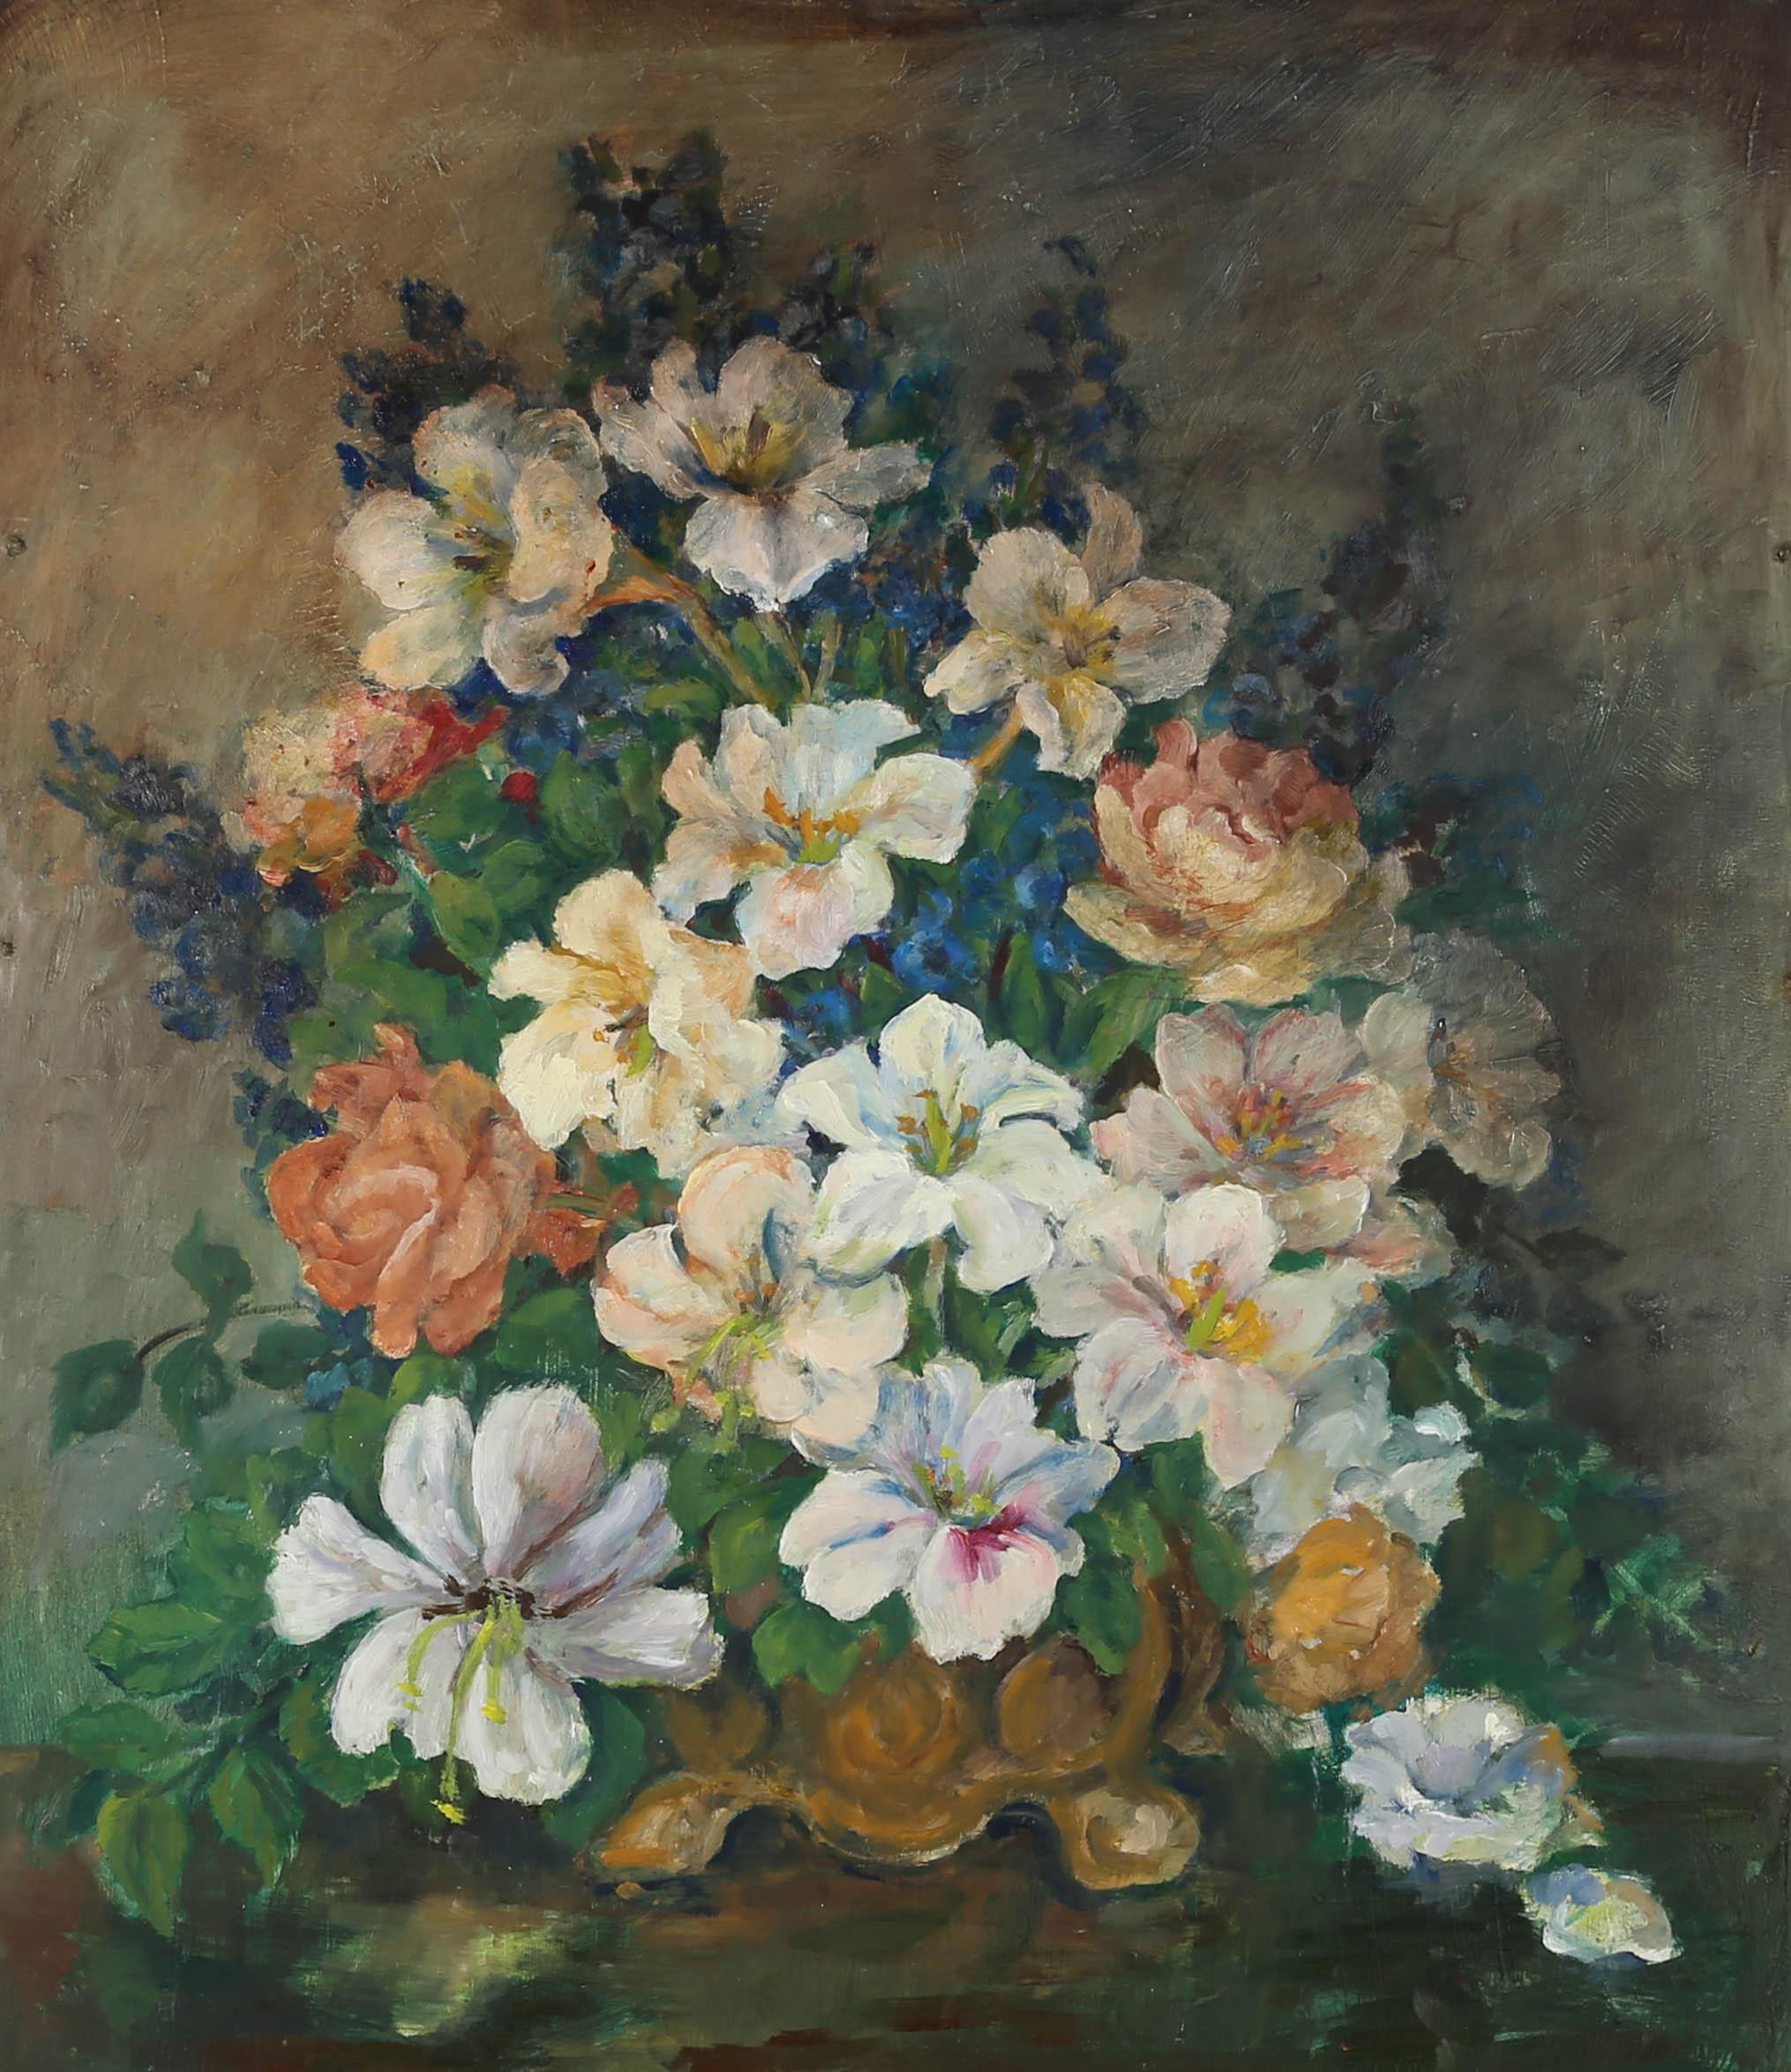 Unknown Still-Life Painting - Early 20th Century Oil - Vibrant Flowers